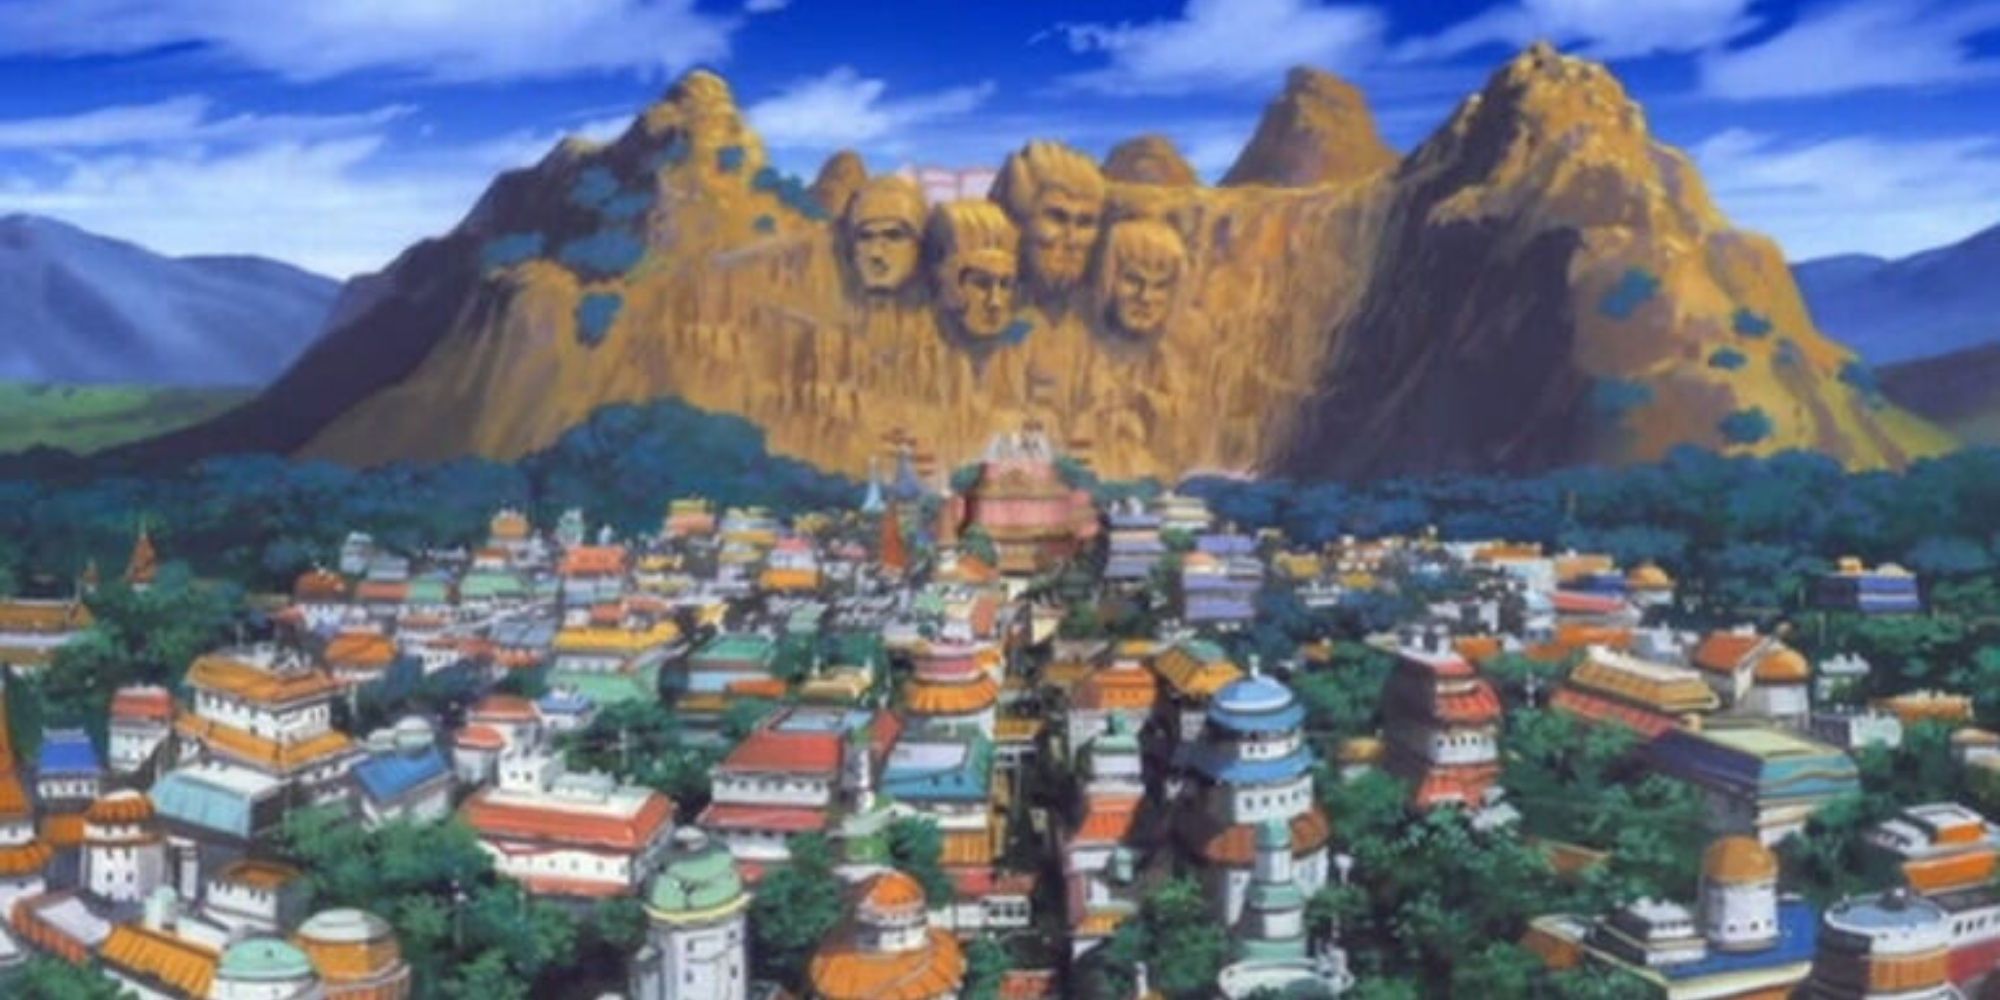 The Leaf Village in Naruto